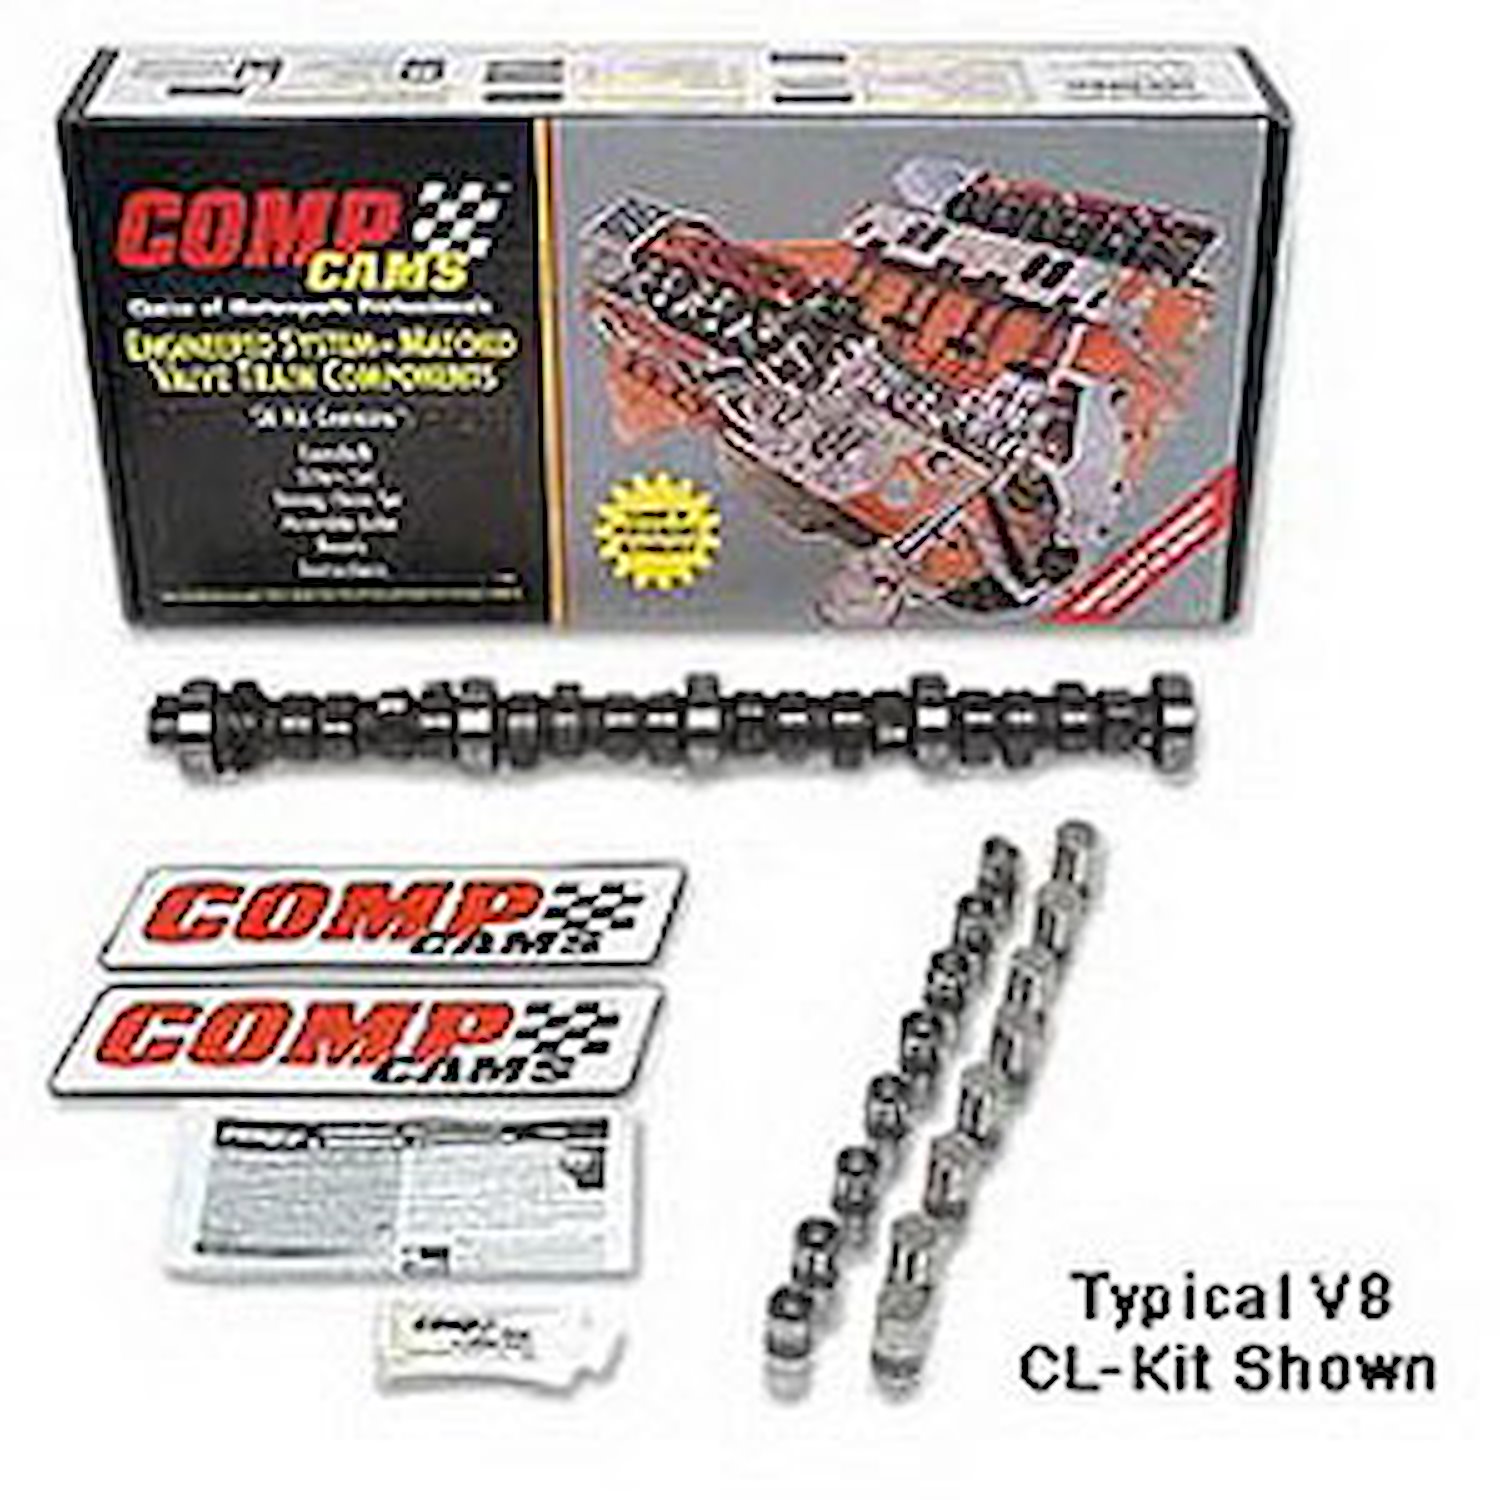 Mutha" Thumpr Hydraulic Flat Tappet Camshaft and Lifter Kit Lift .506"/.491" Duration 287/305 RPM Range 2200-6100